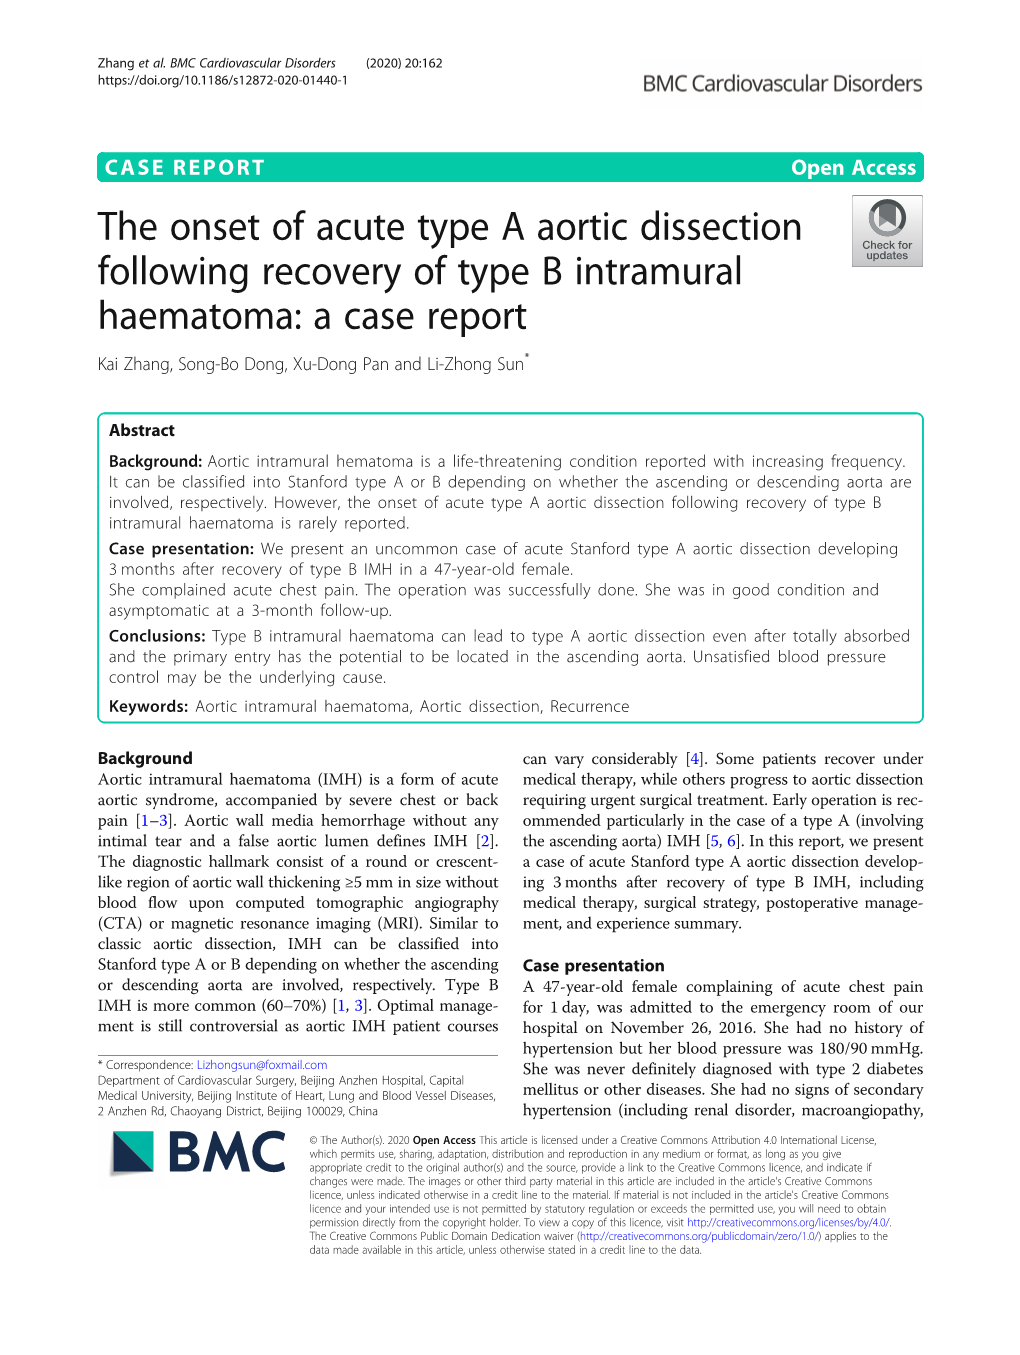 The Onset of Acute Type a Aortic Dissection Following Recovery of Type B Intramural Haematoma: a Case Report Kai Zhang, Song-Bo Dong, Xu-Dong Pan and Li-Zhong Sun*